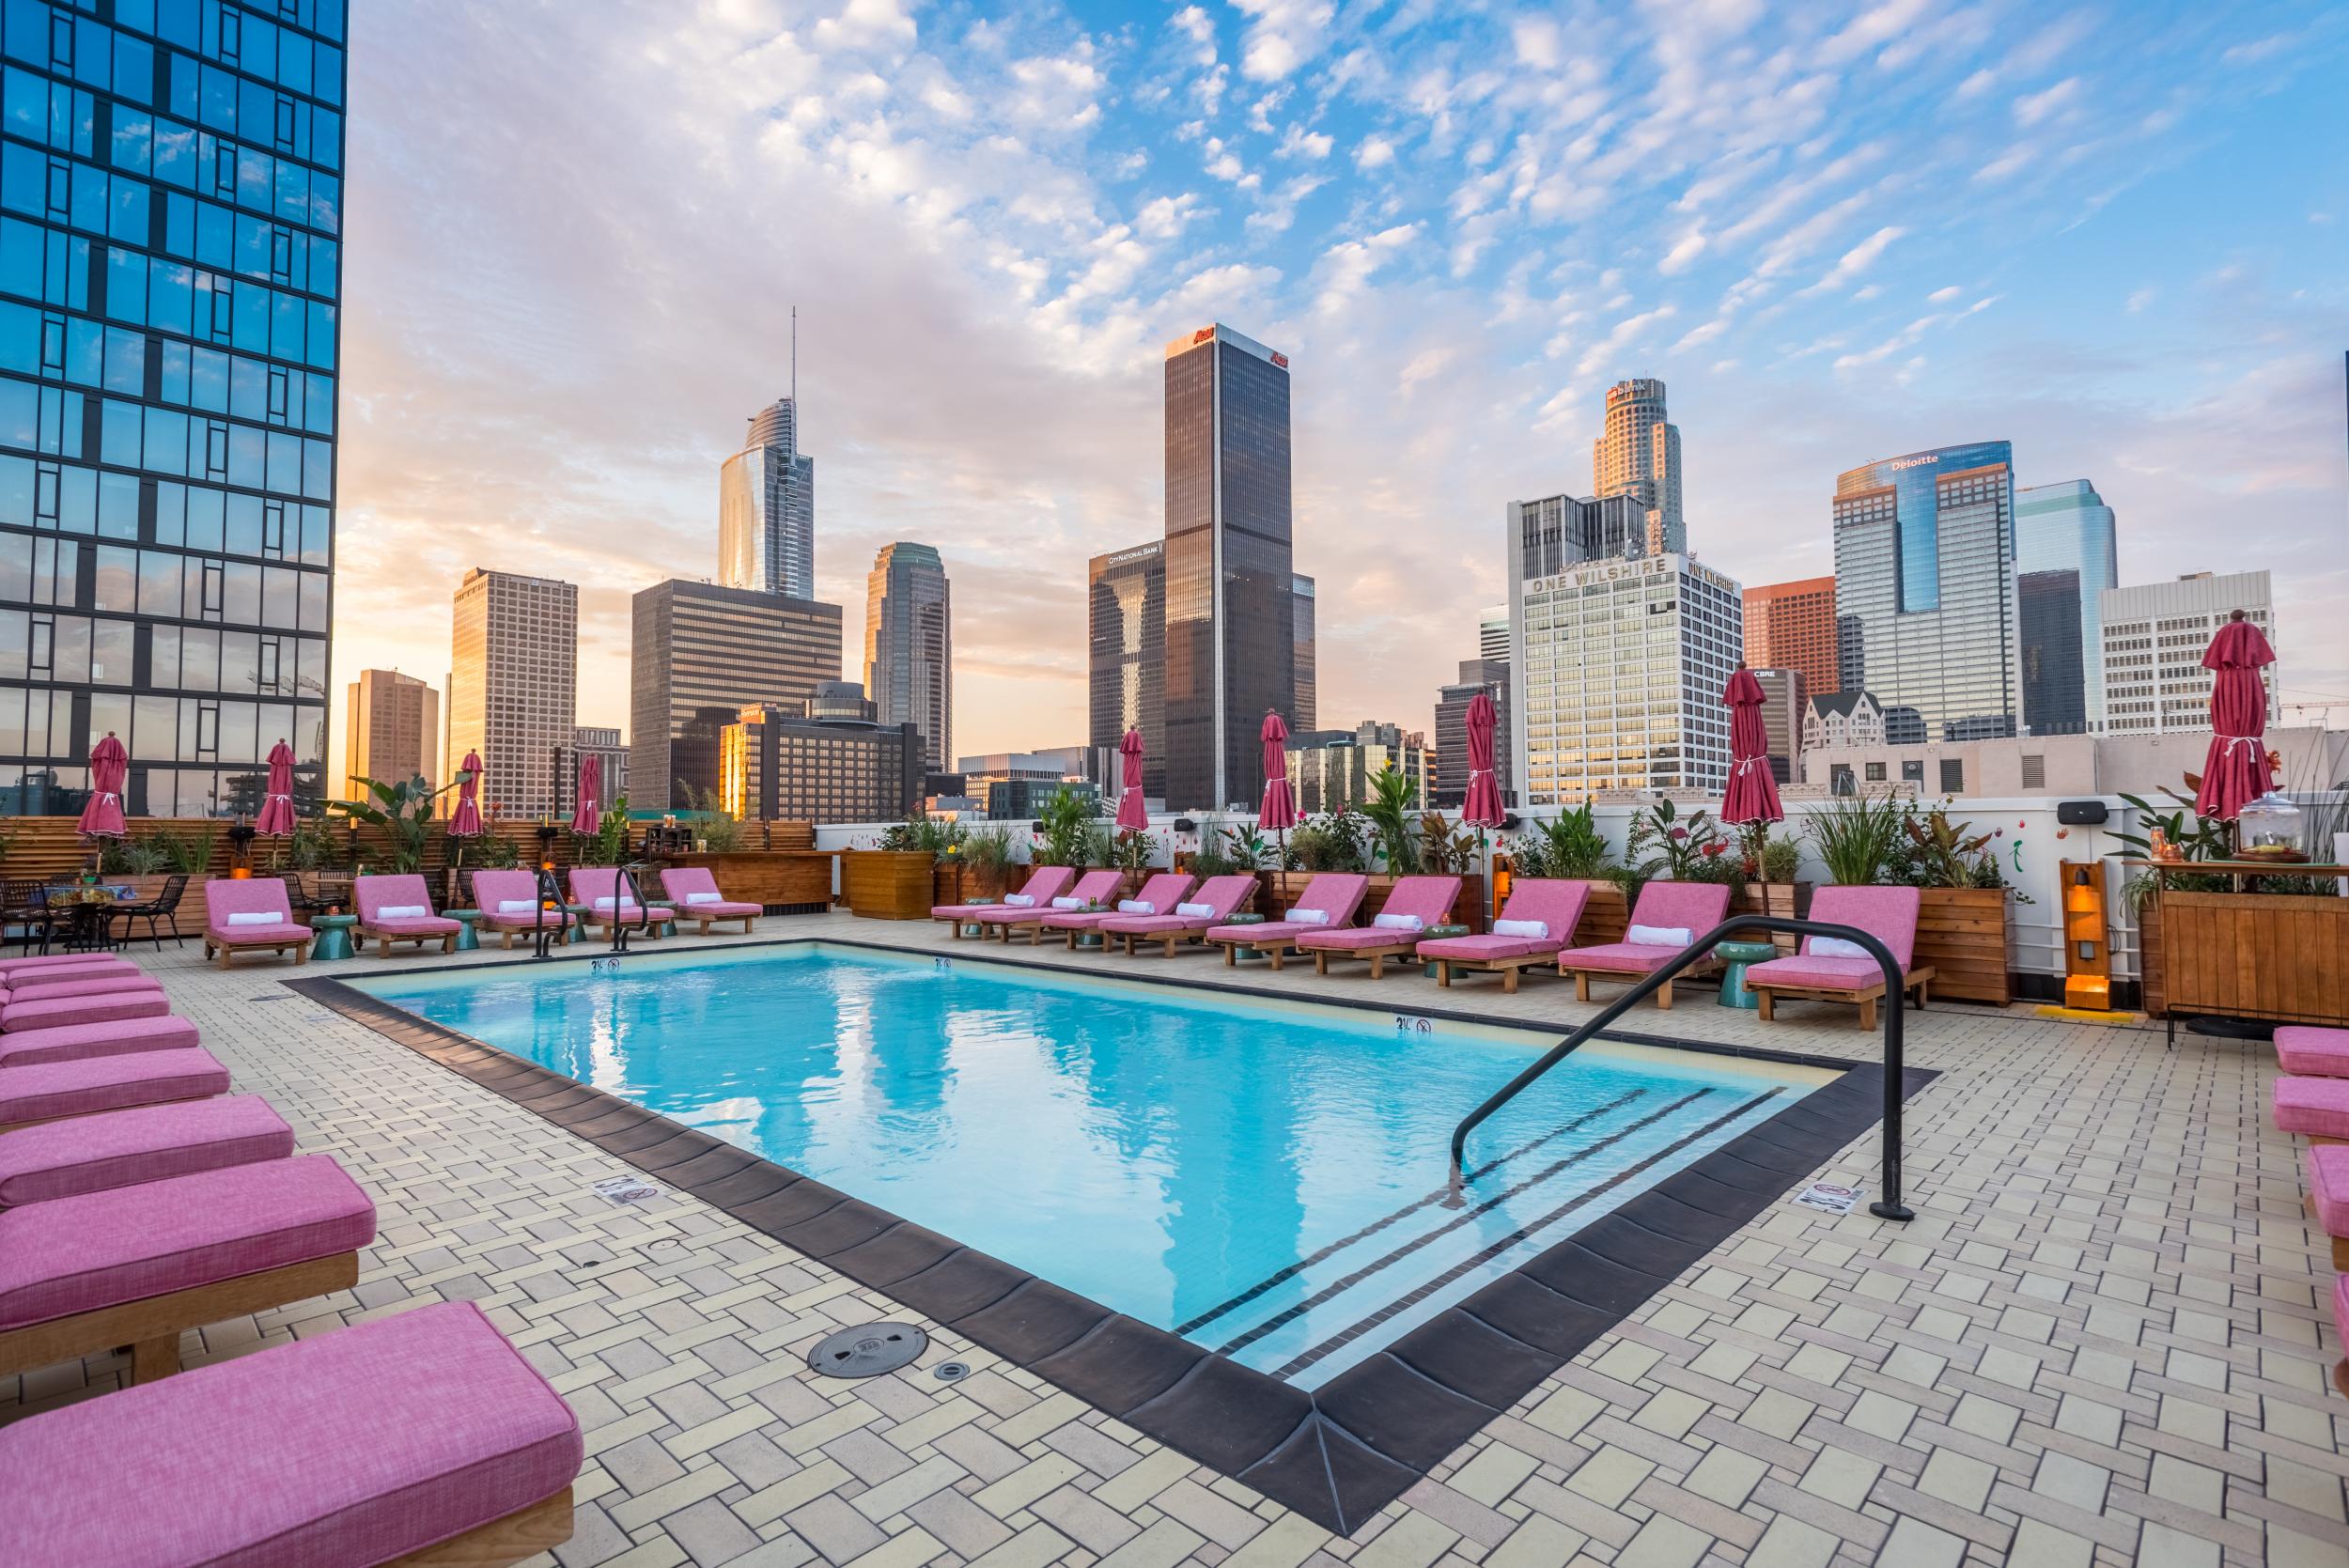 The Freehand hotel has all the components for a perfect staycation: including a rooftop pool and bar